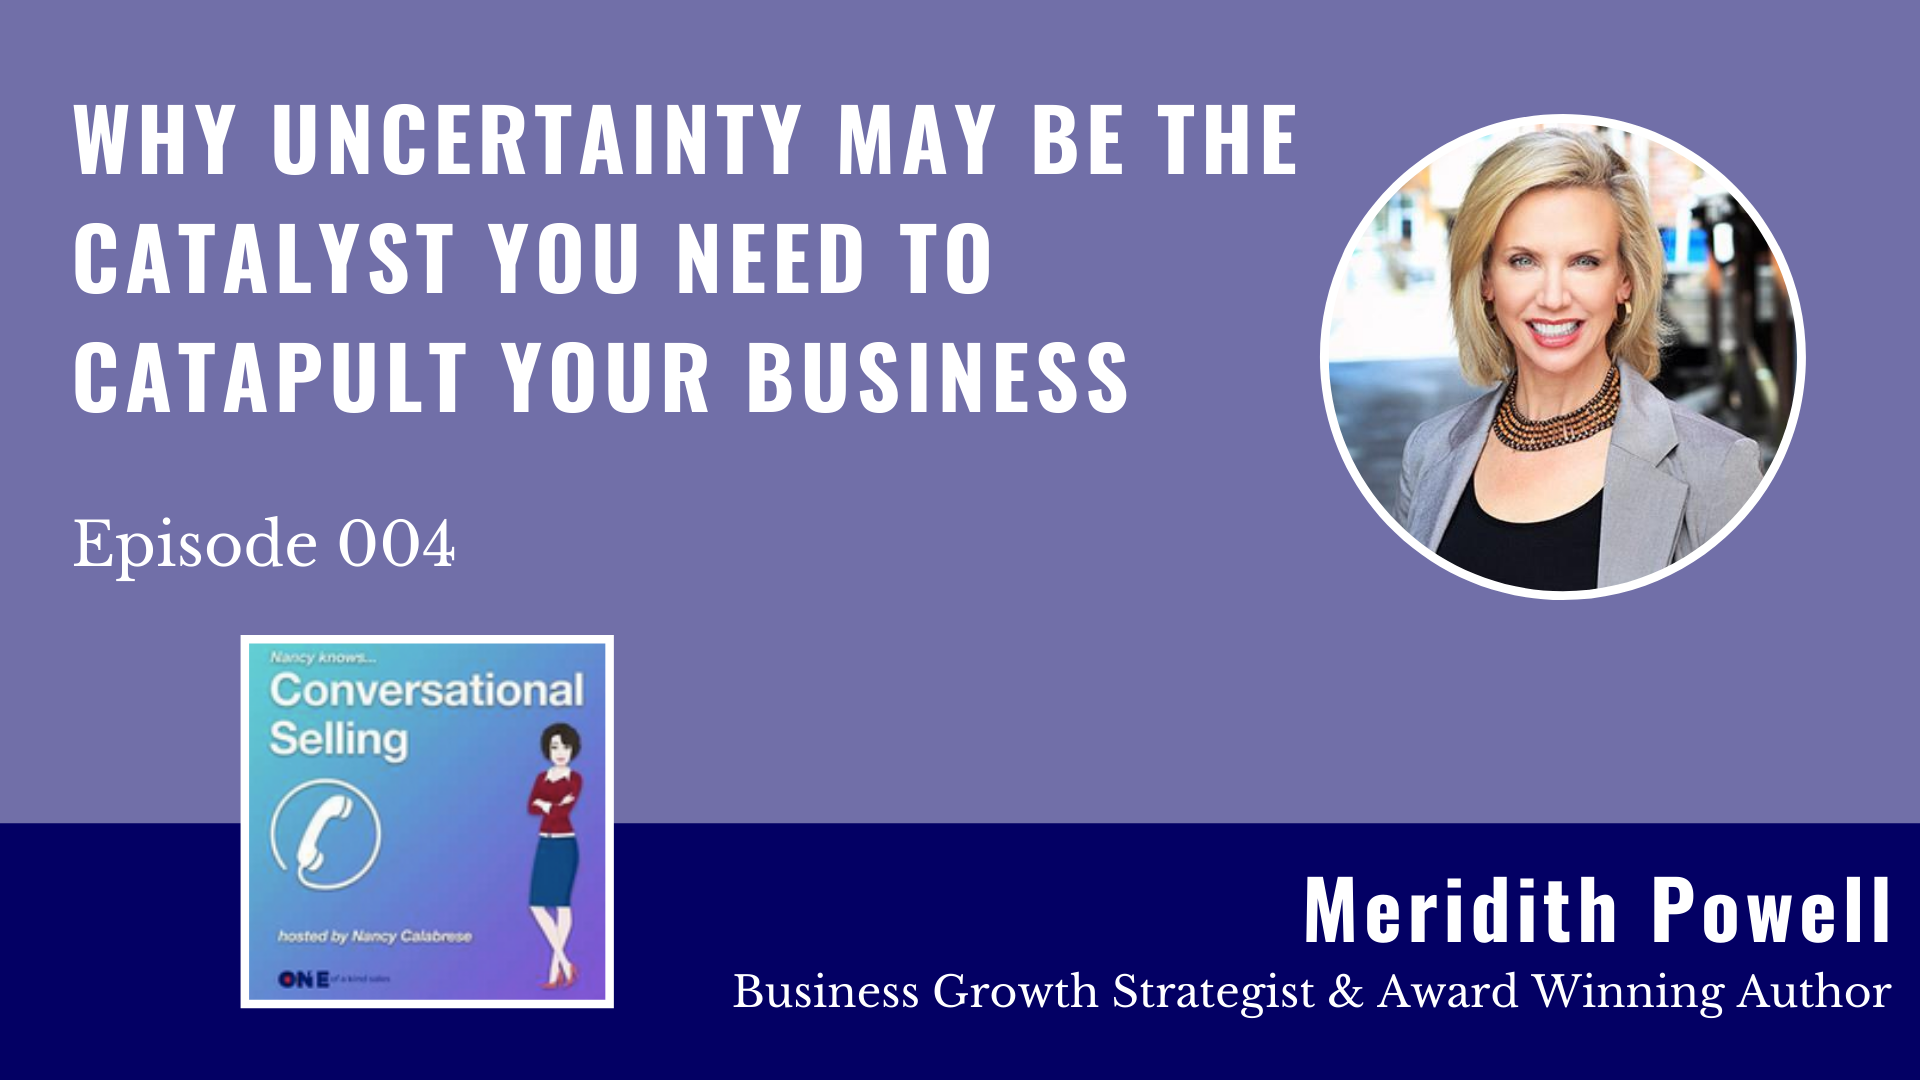 Meridith Powell | Why Uncertainty May Be The Catalyst You Need To Catapult Your Business